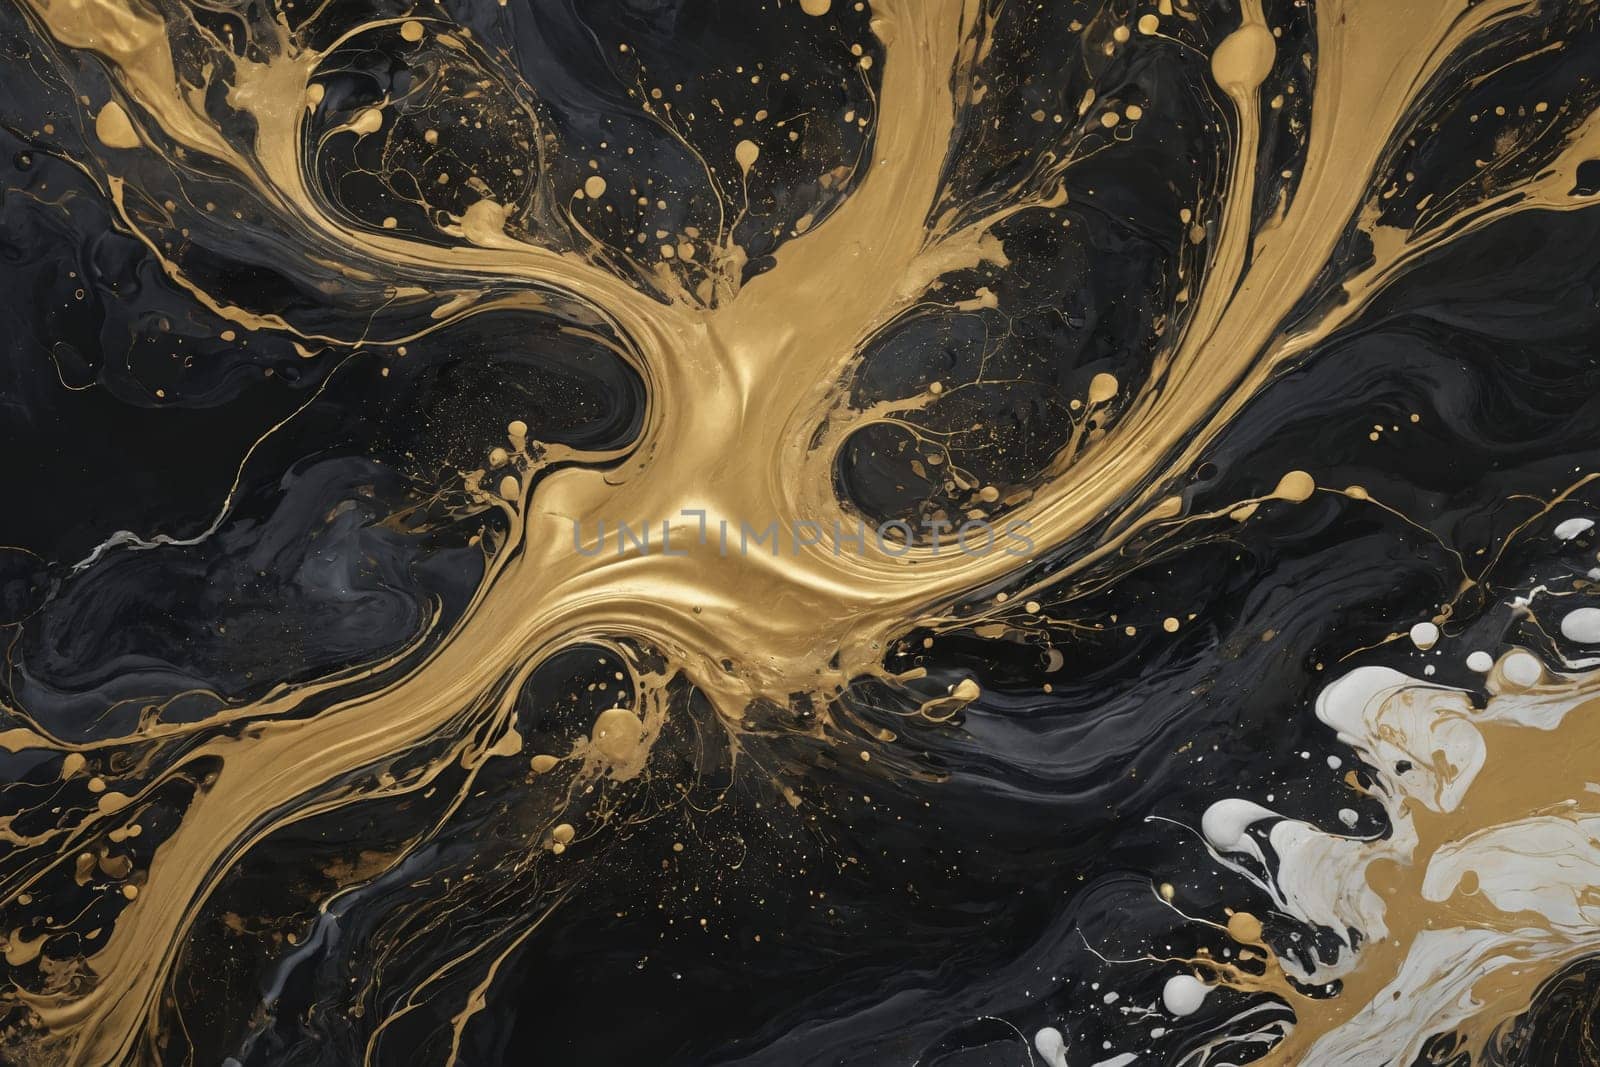 Liquid Gold: Dynamic Swirls Against a Black Canvas by Andre1ns